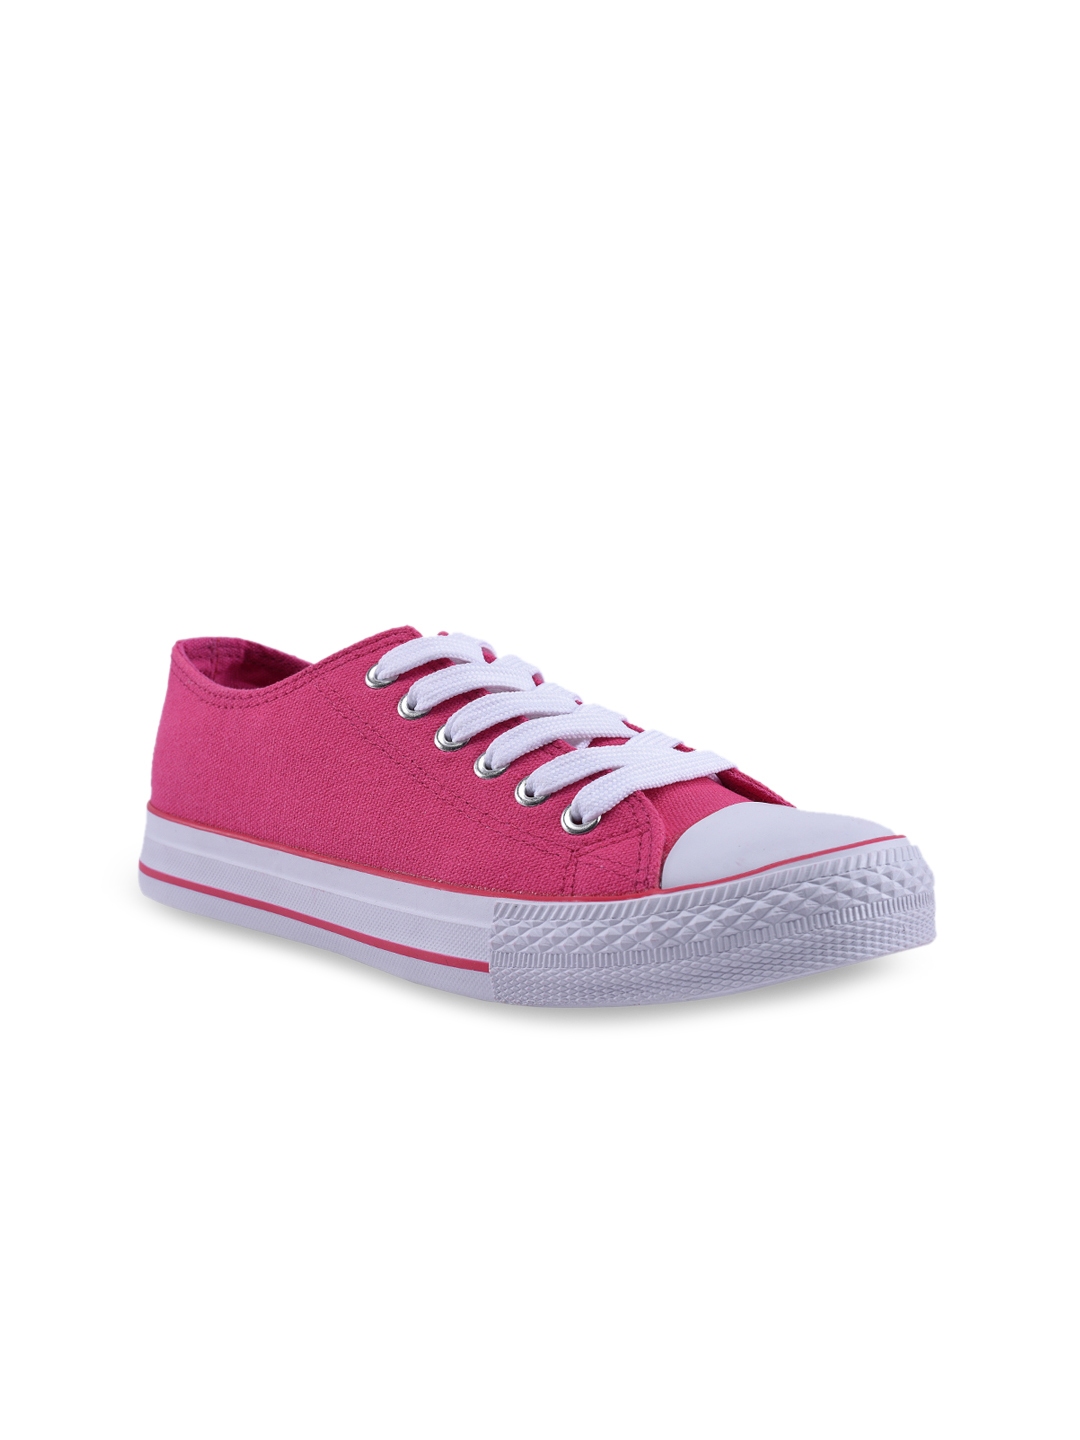 Buy Admiral Women Pink Sneakers - Casual Shoes for Women 4451537 | Myntra